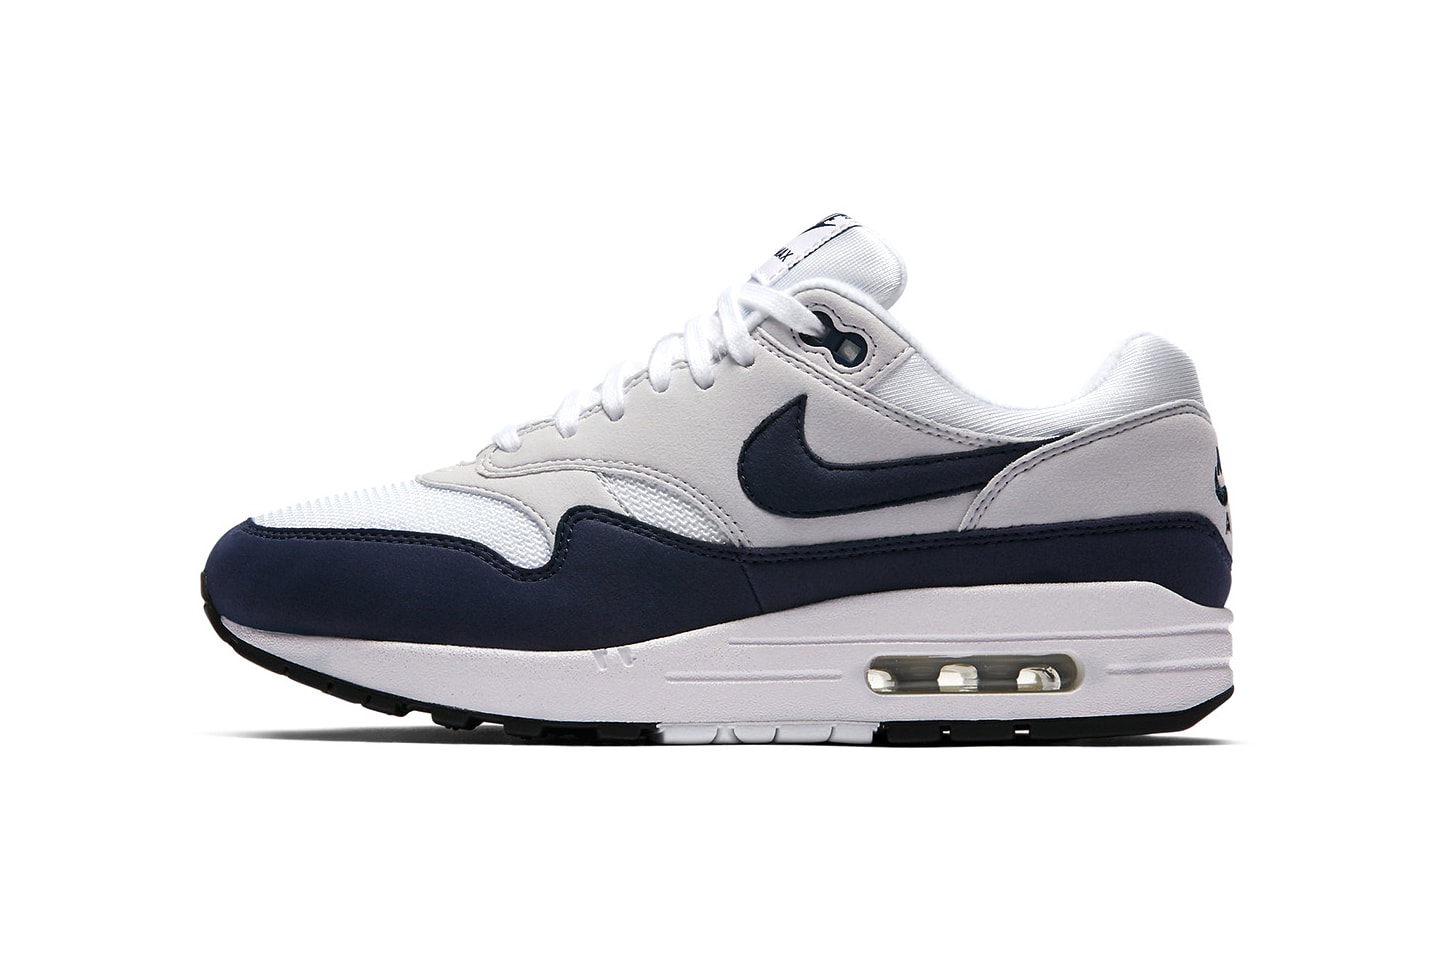 Nike Air Max 1 White Grey Obsidian 2018 January February Release Date Info Sneakers Shoes Footwear